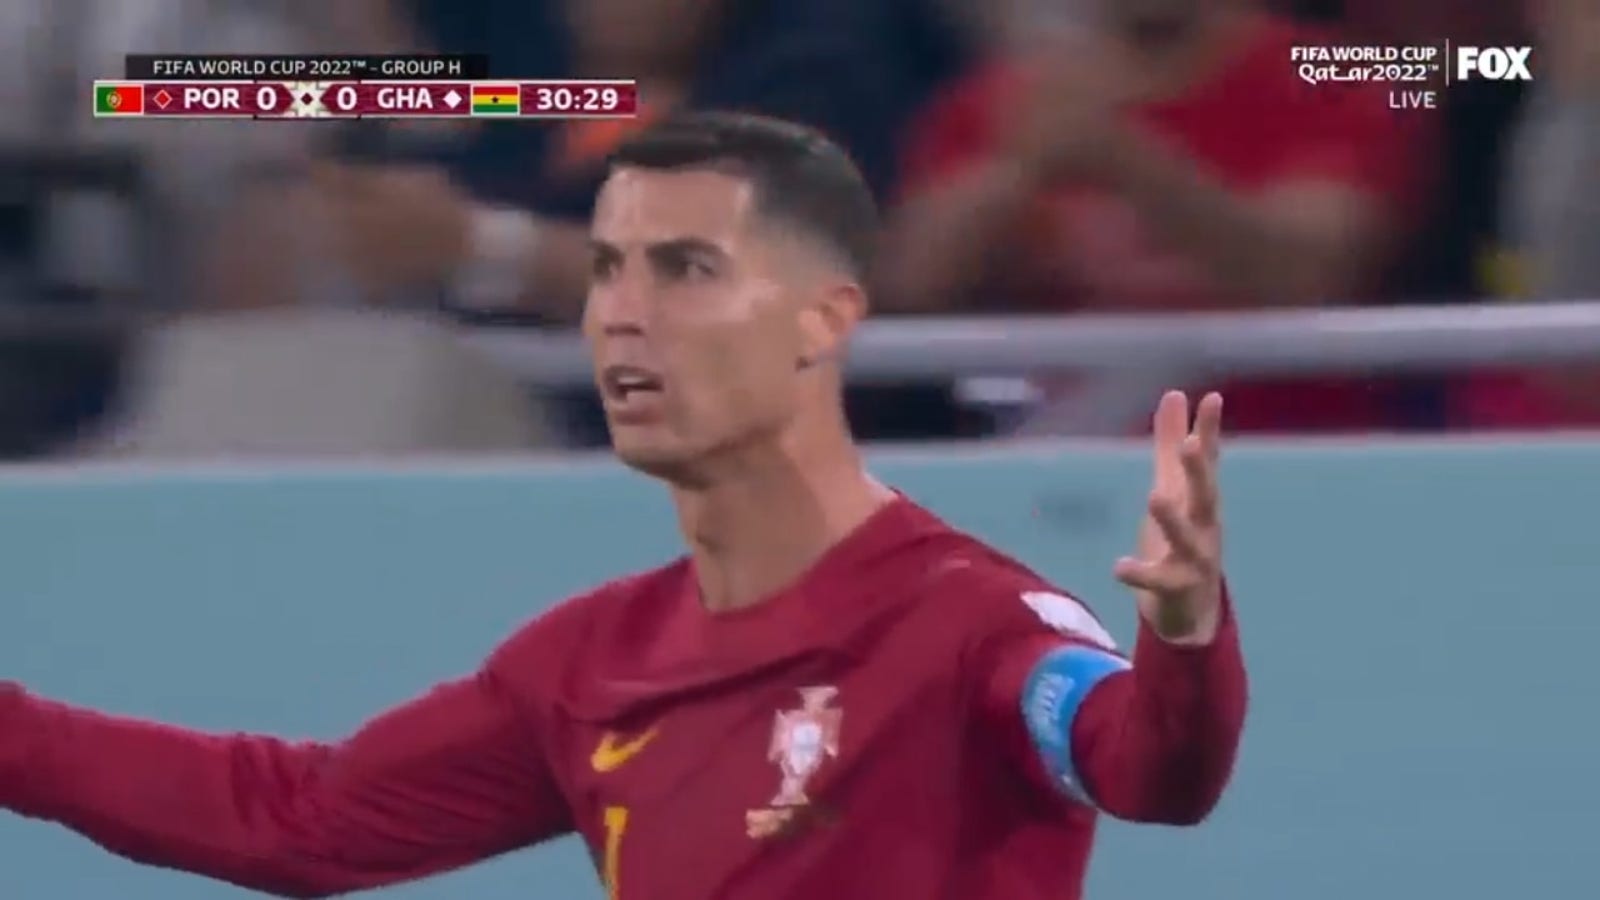 Cristiano Ronaldo's goal vs.  Ghana was destroyed by foul